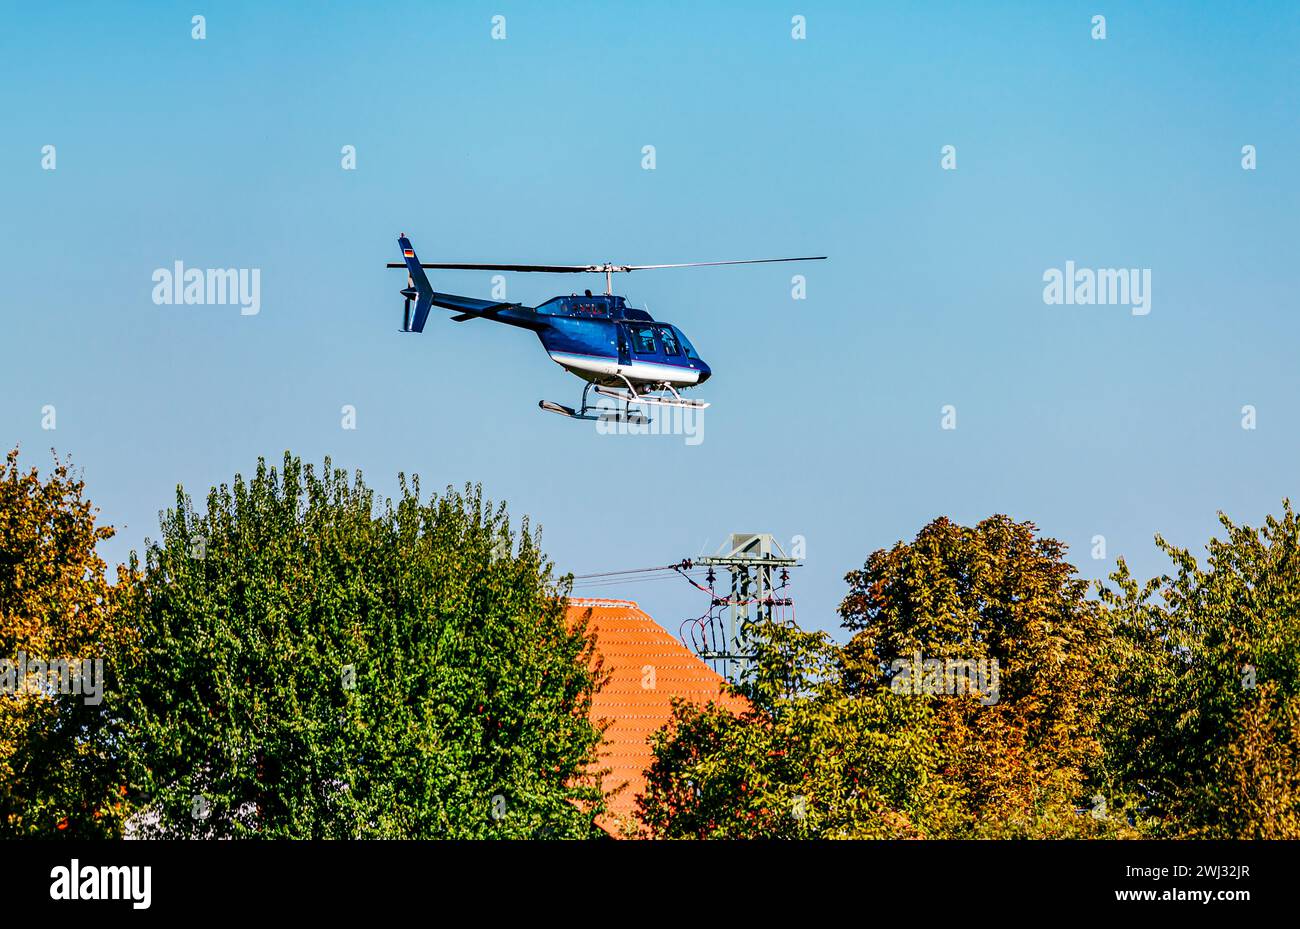 Helicopter flying in the sky. High voltage repair helicopter over residential building near a high Stock Photo